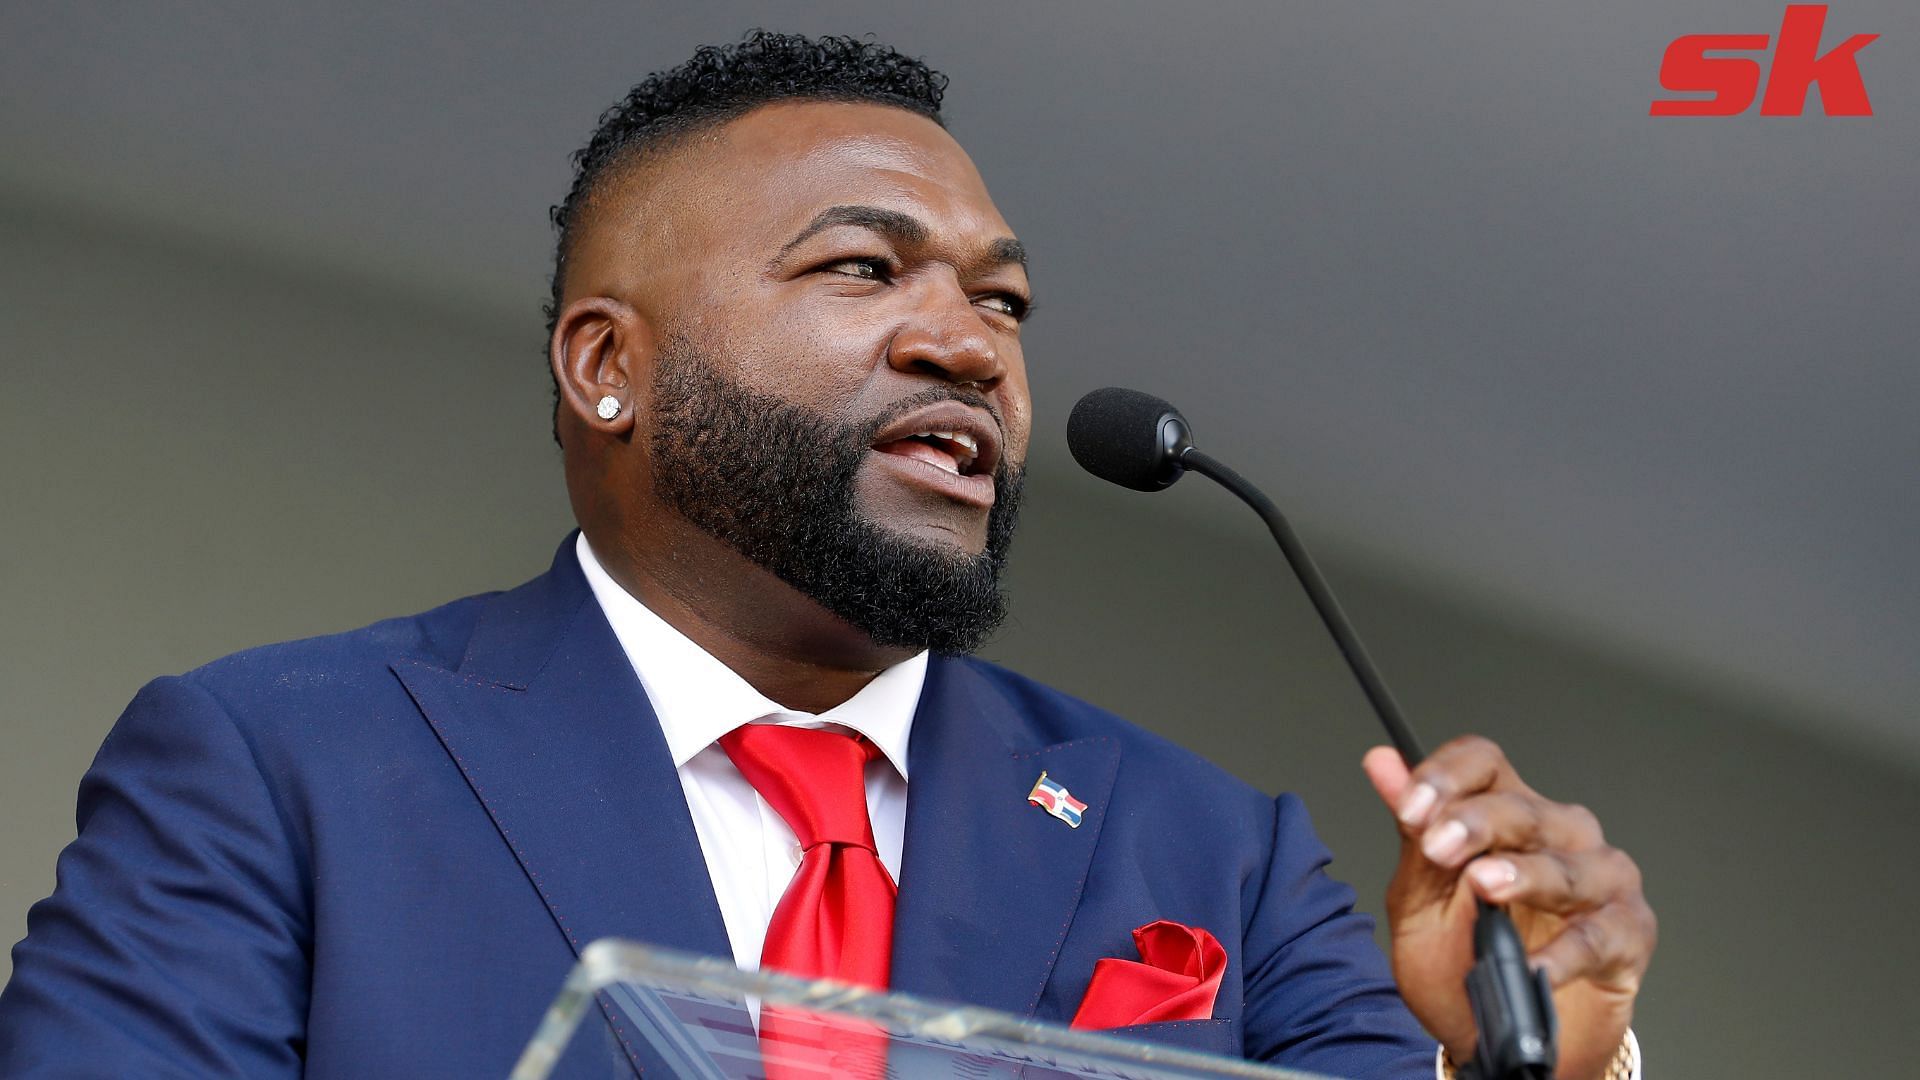 David Ortiz was delighted and proud to switch to American citizenship after spending making his MLB debut in 1996